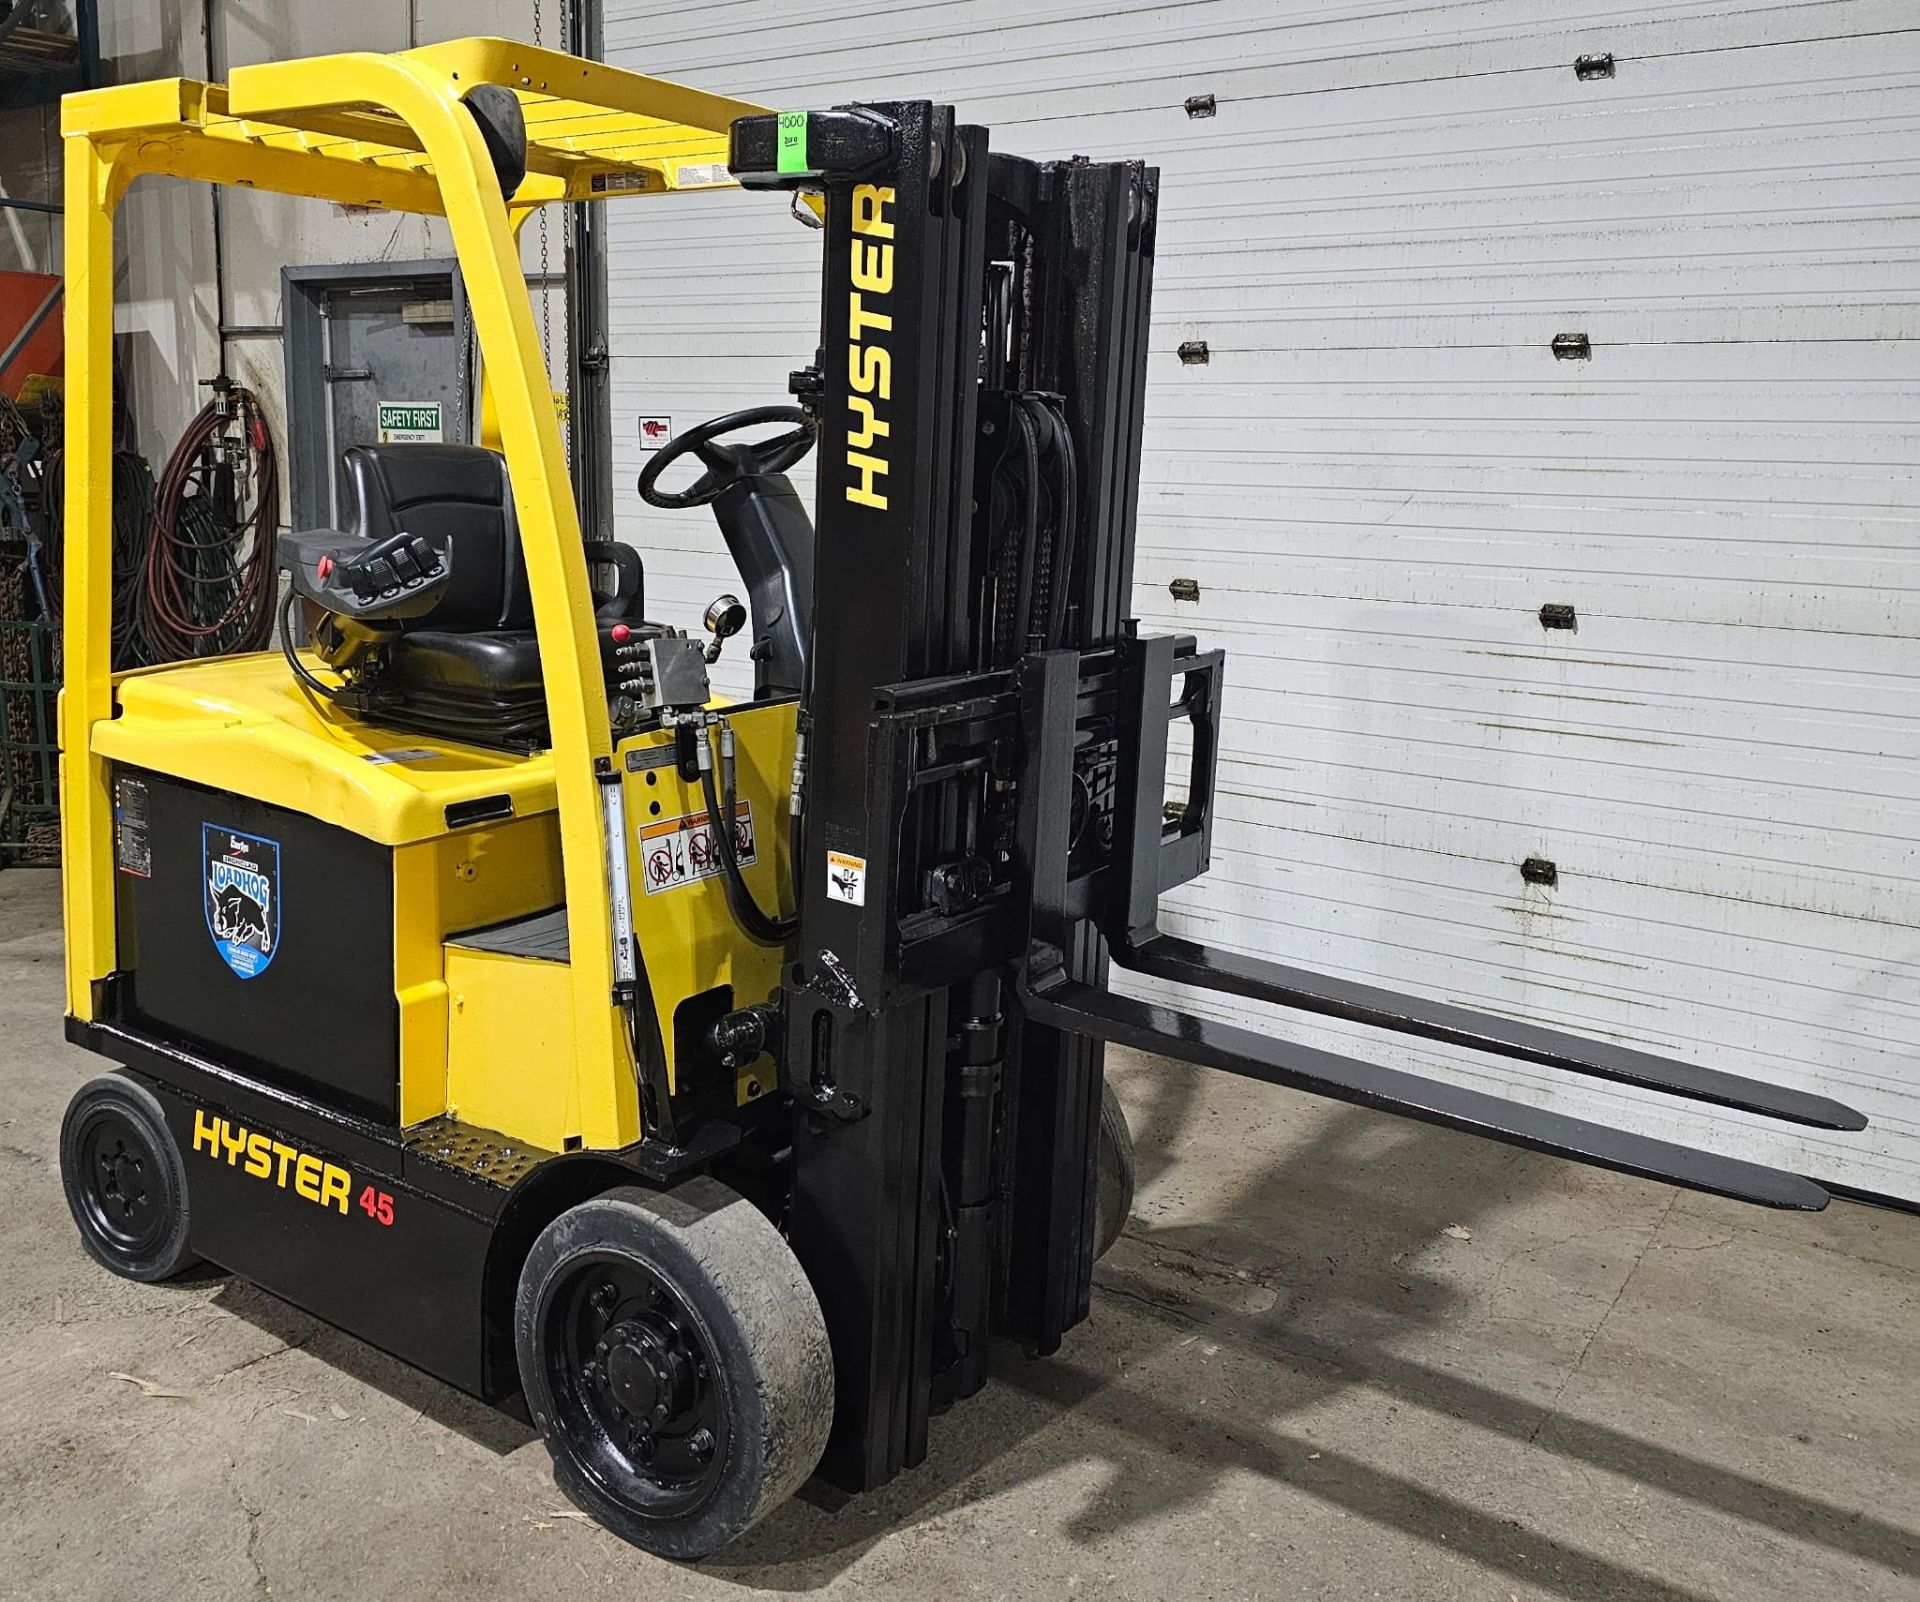 2010 Hyster 4,500lbs Capacity Electric Forklift 48v sideshift 3-STAGE MAST 189" load height - Image 9 of 11